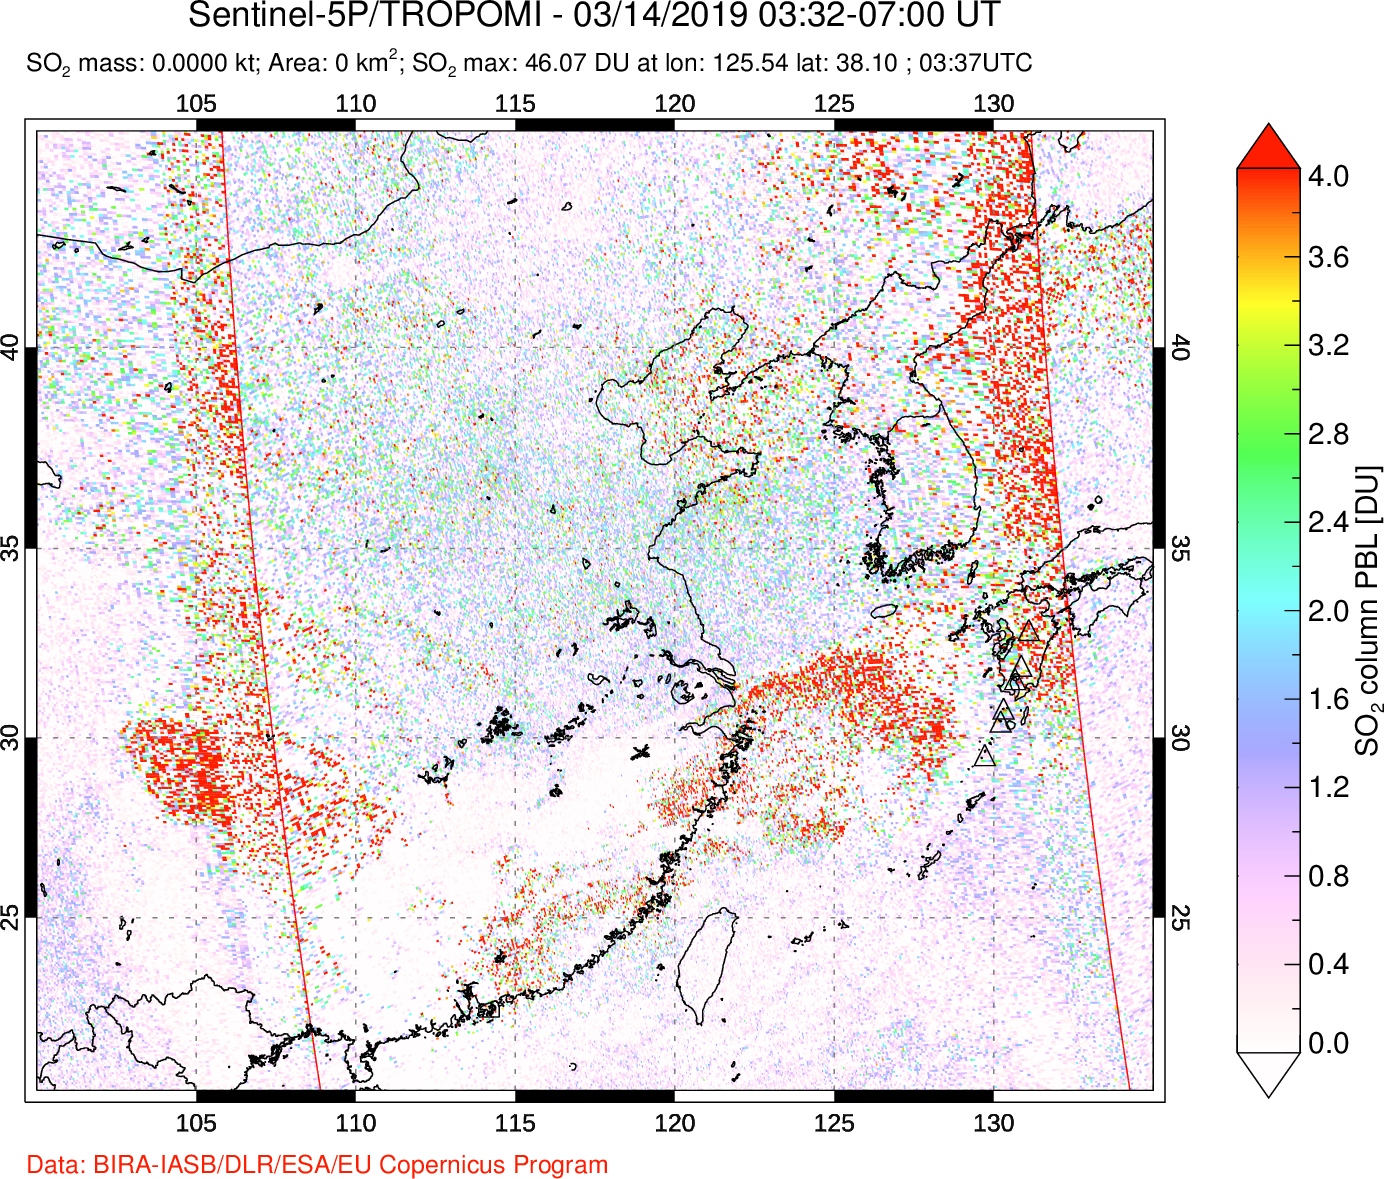 A sulfur dioxide image over Eastern China on Mar 14, 2019.